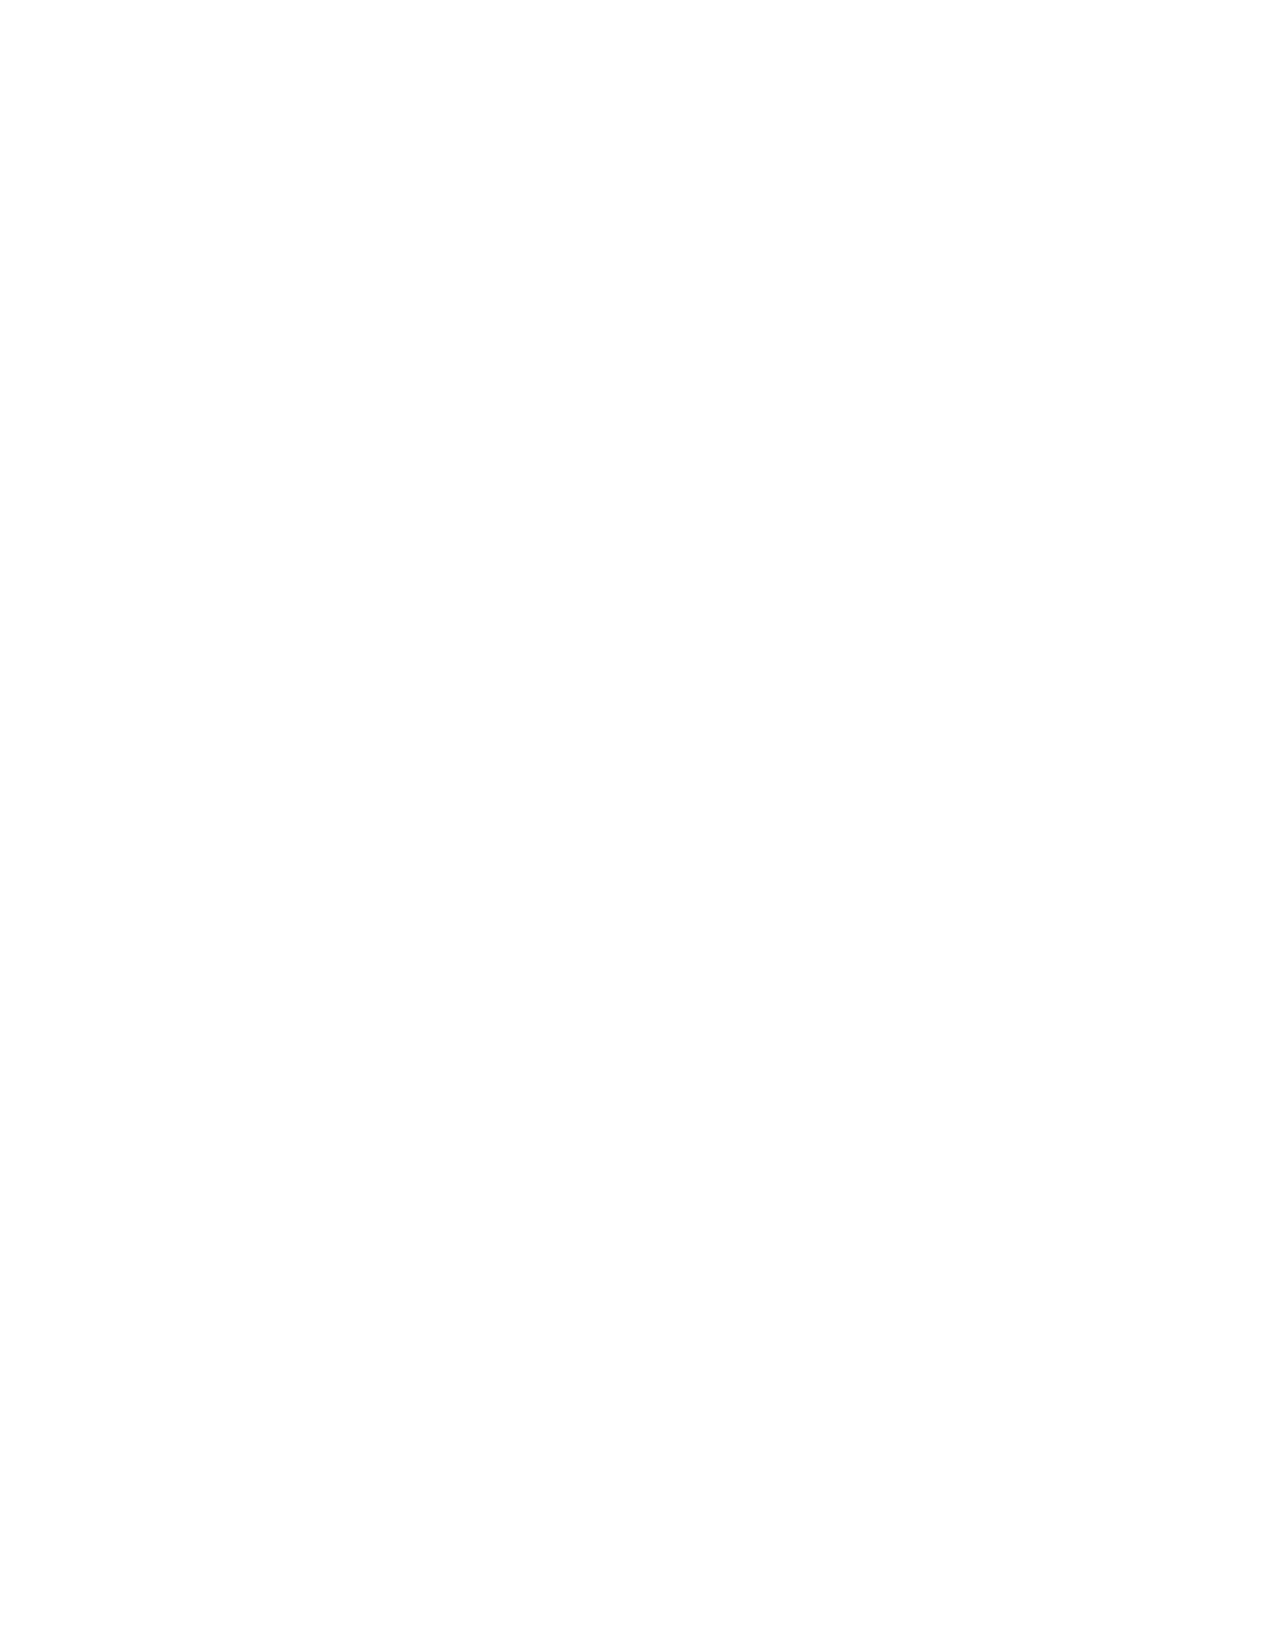 INNOVATIVE,CREATIVE,ACTIVE,TOGETHER